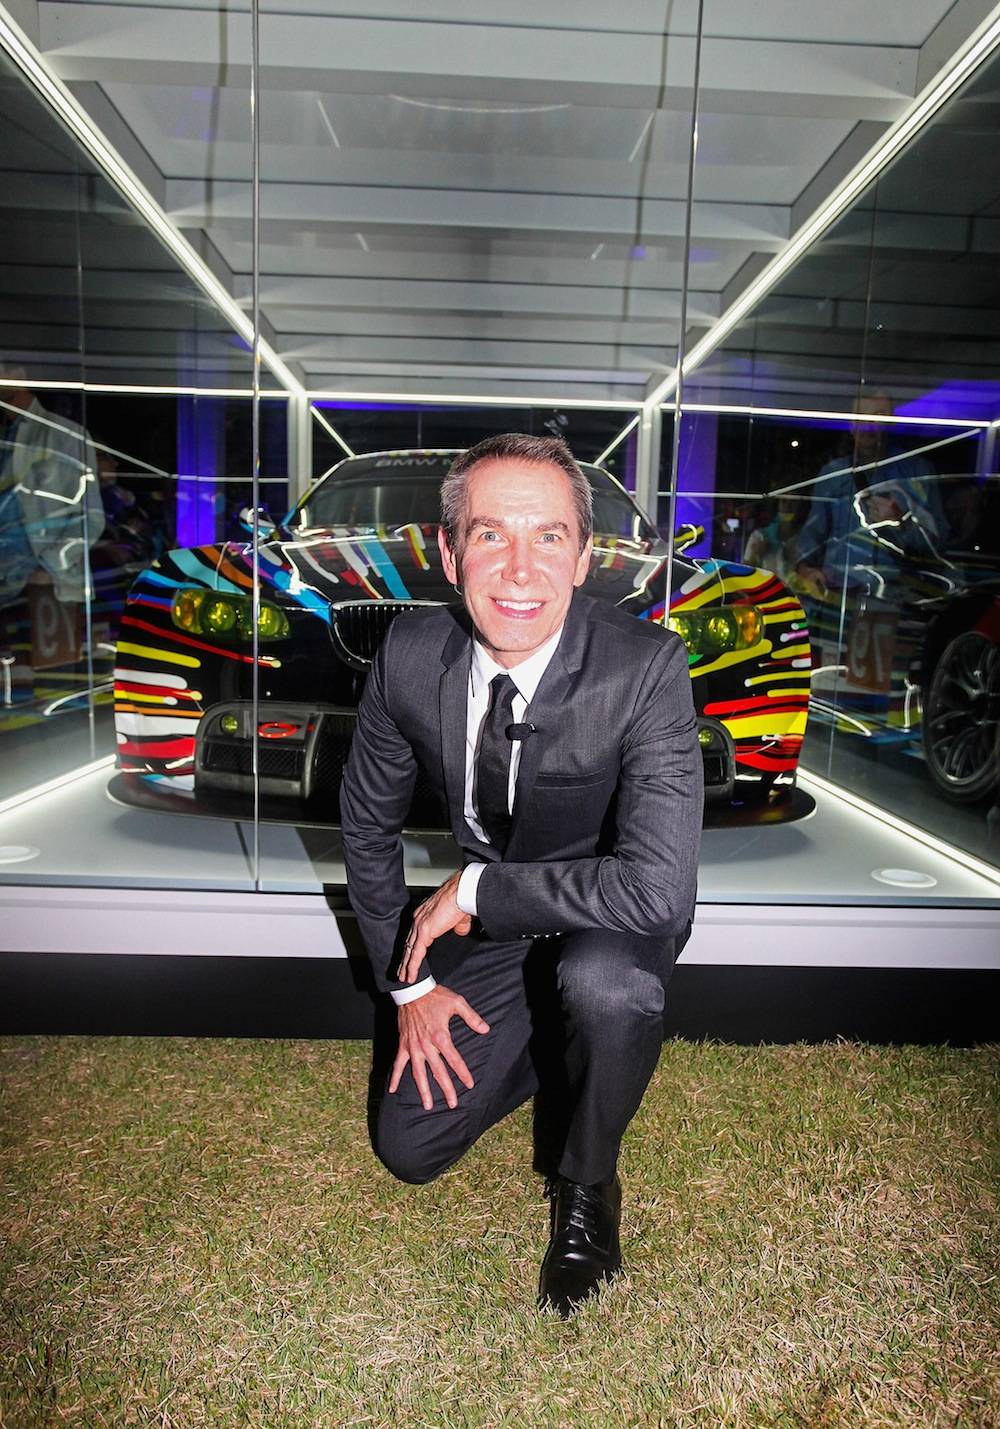 Jeff Koons BMW Art Car US Premiere And Andy Warhol BMW Art Car Exhibition At Art Basel In Miami Beach